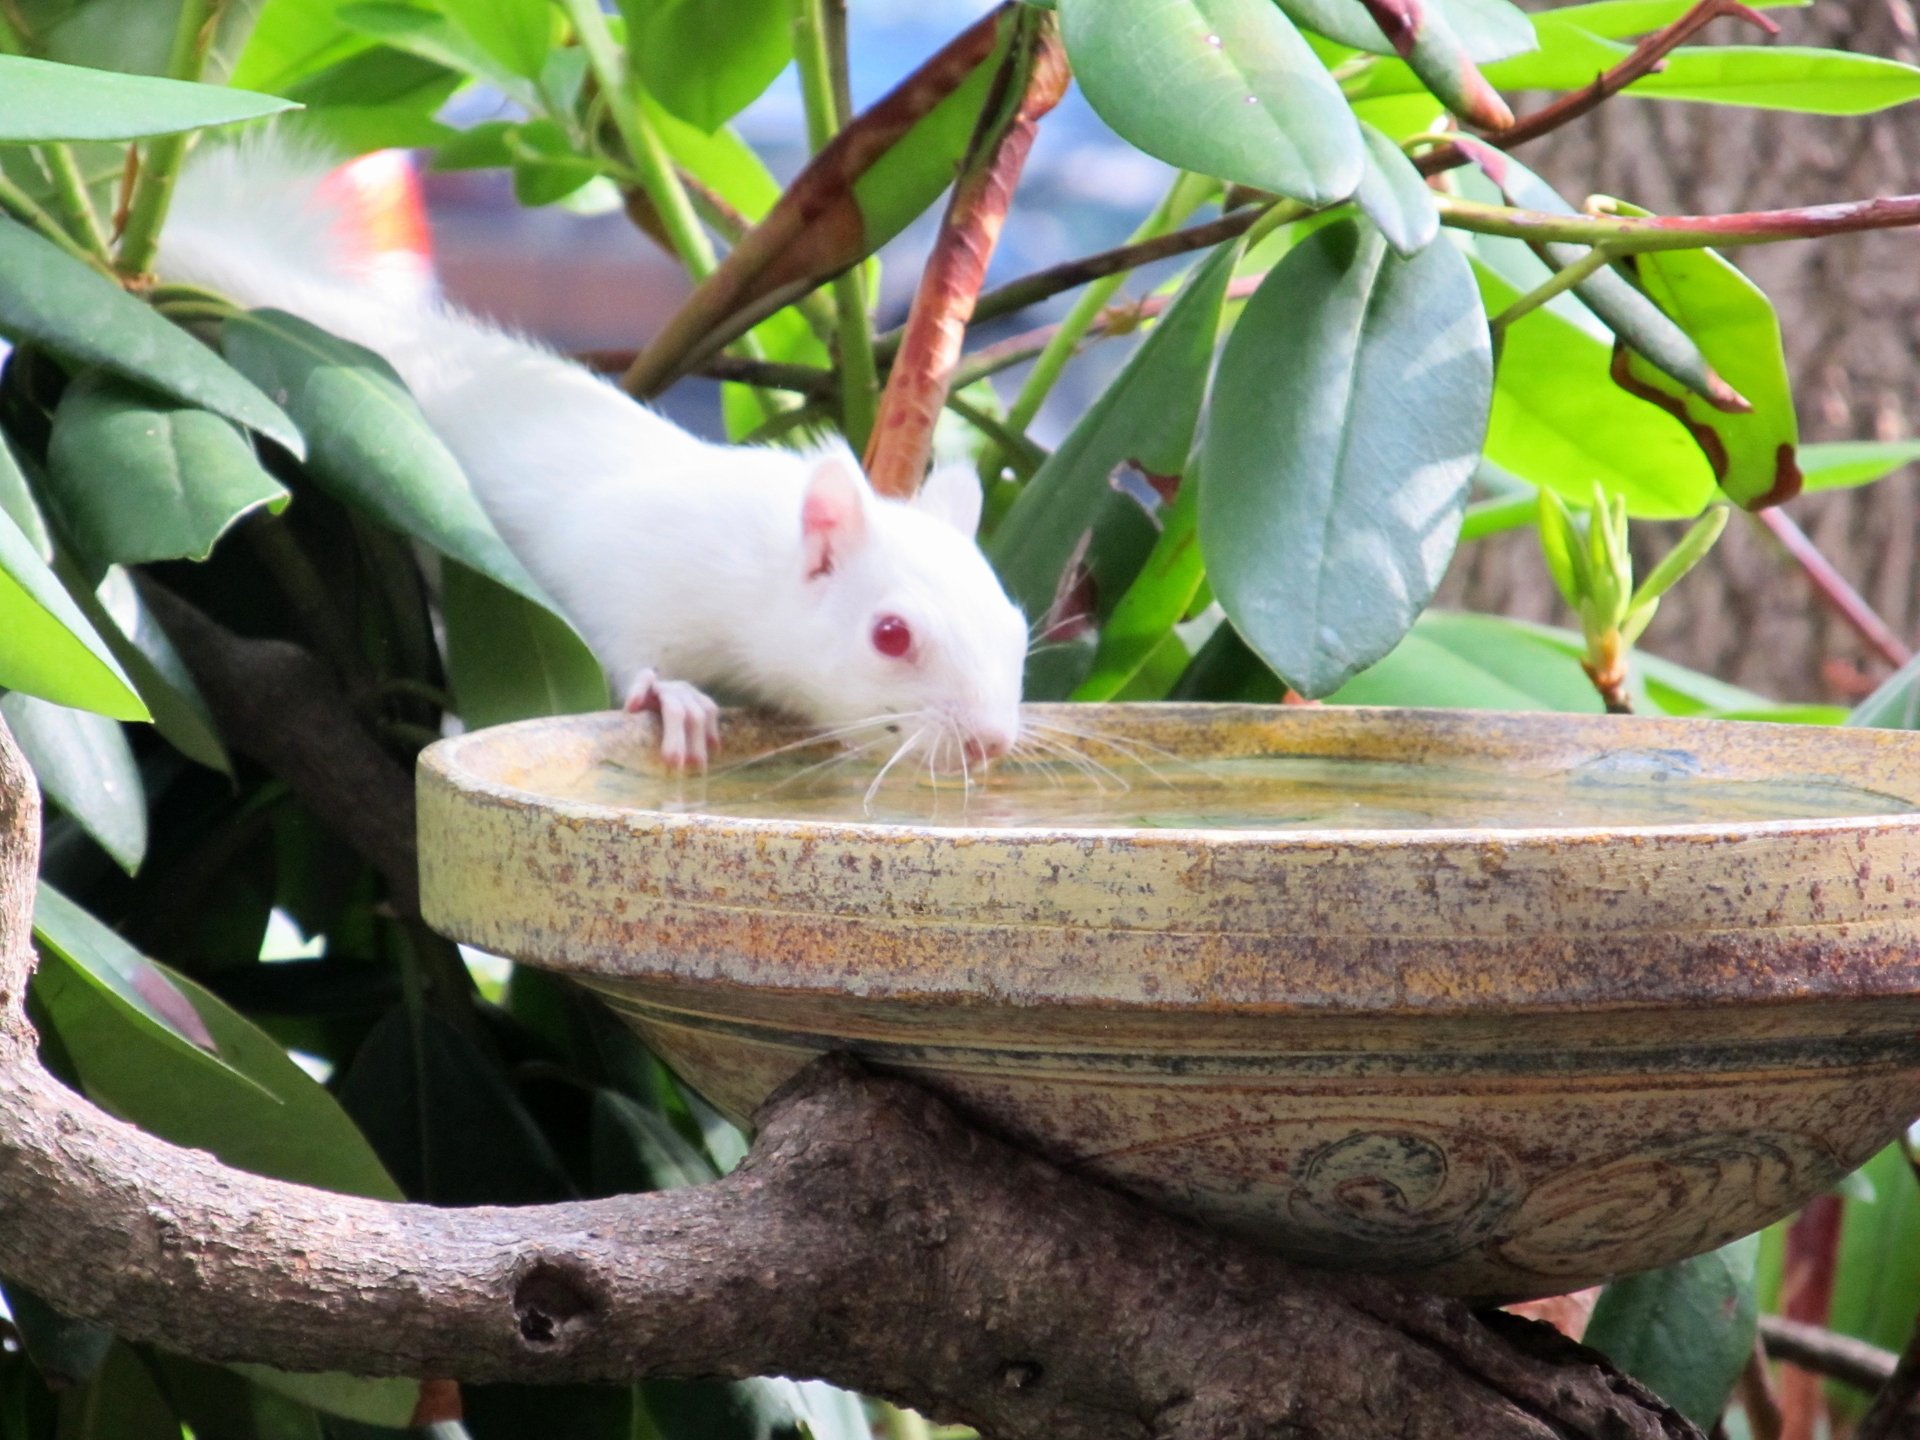 Albino squirrel takes a drink out of bird bath